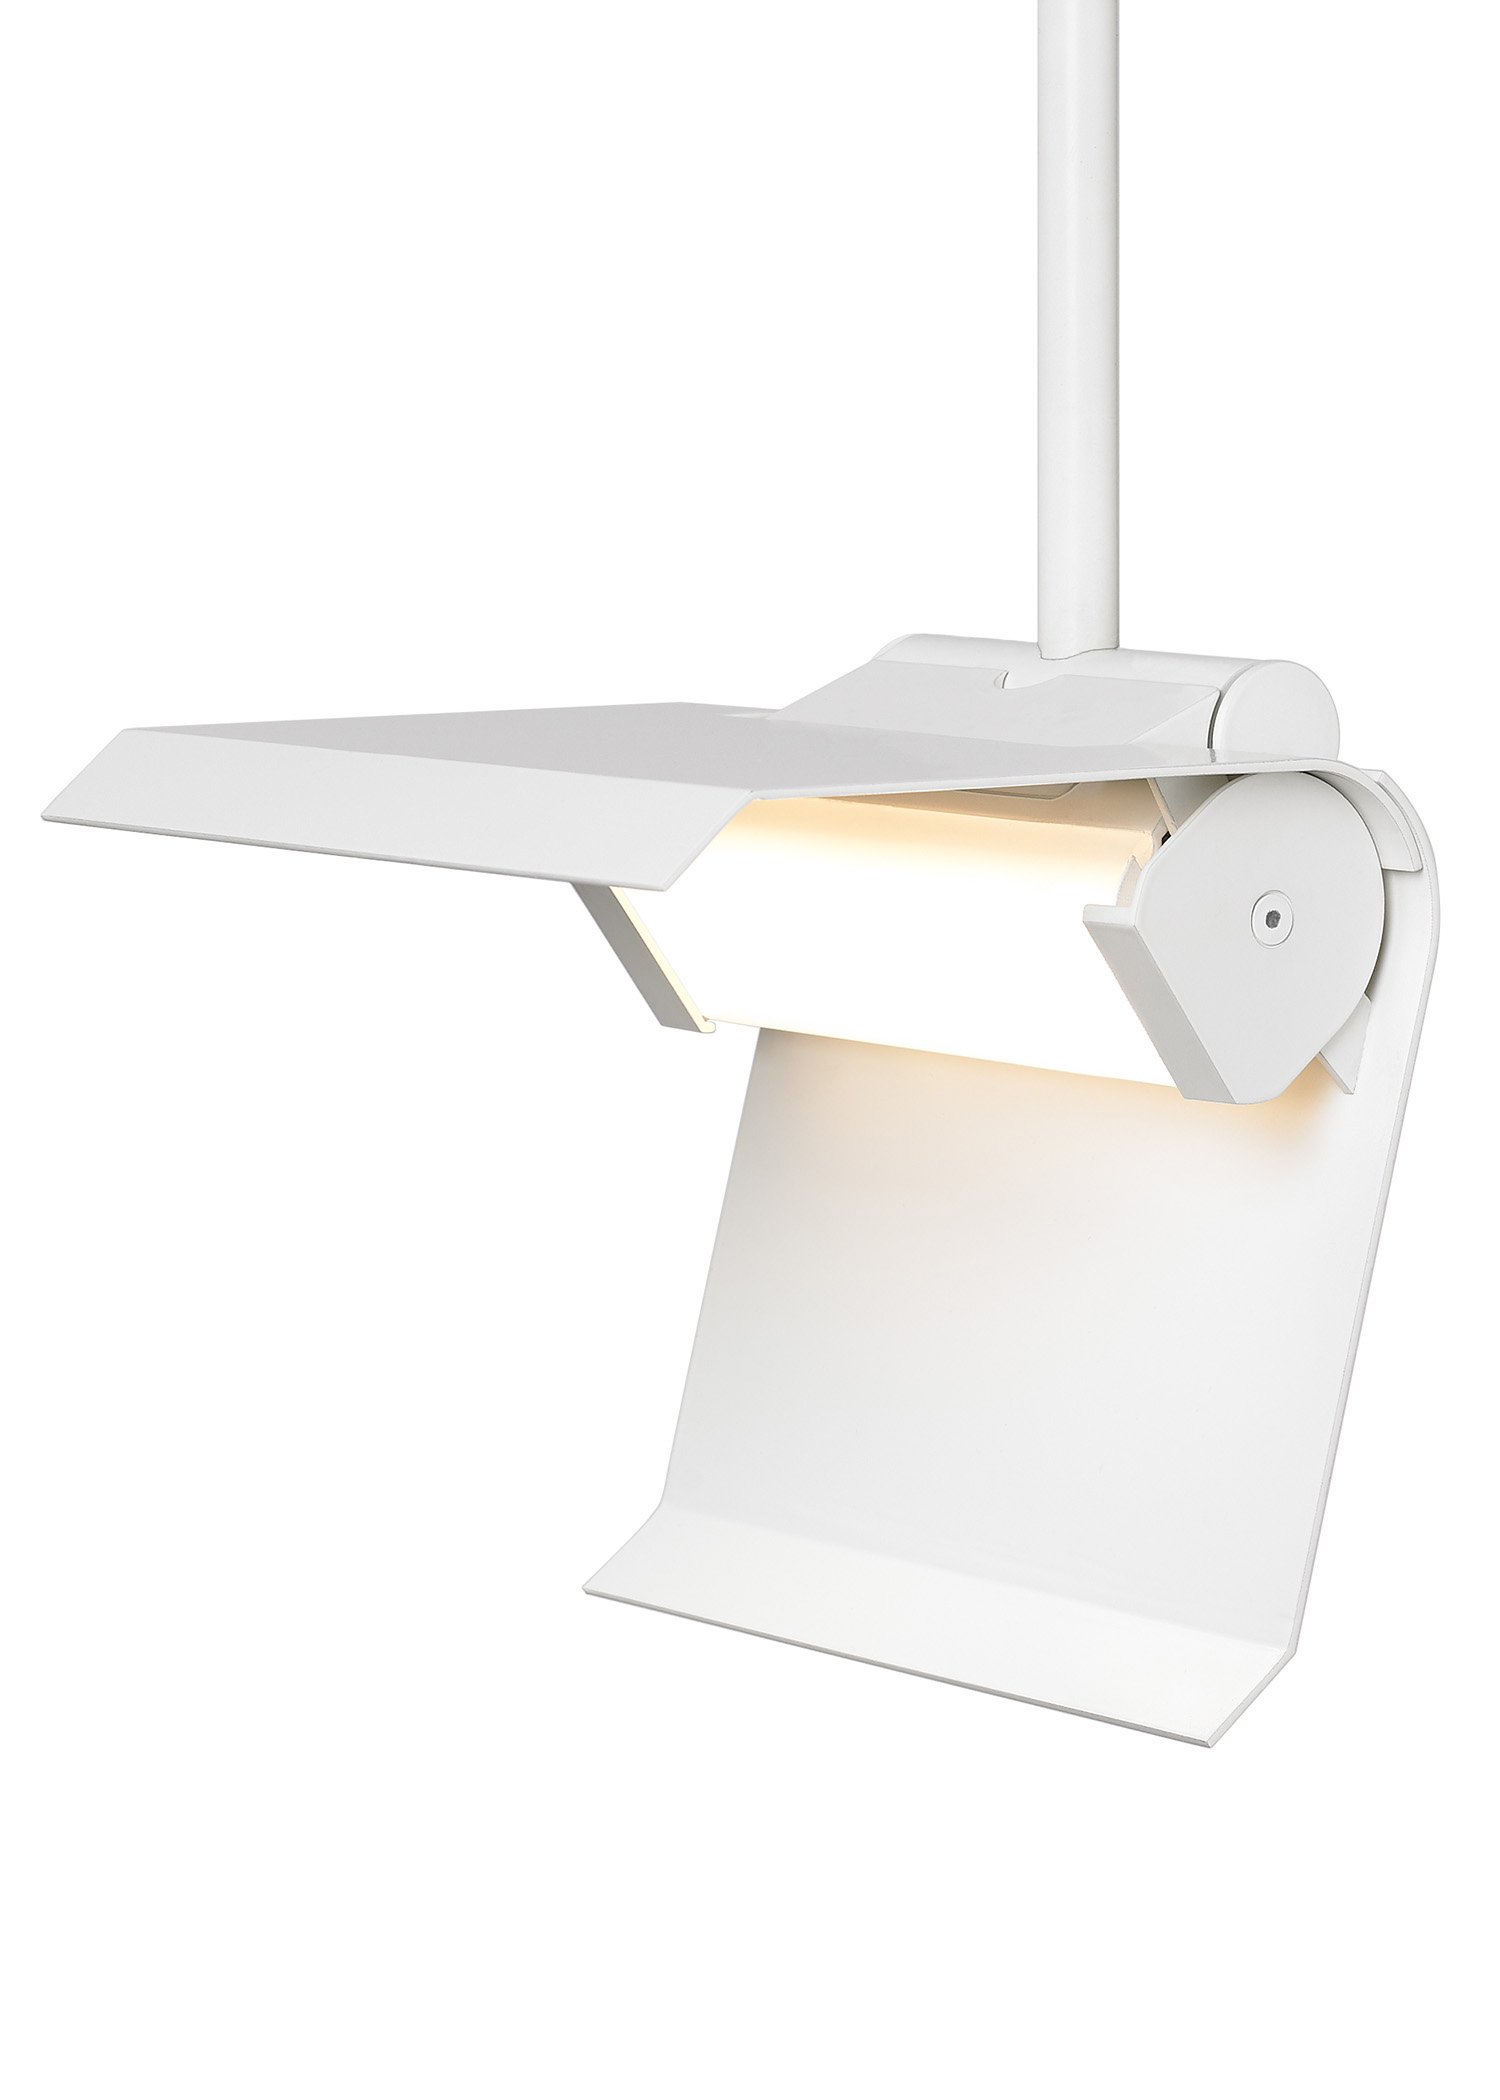 The Render LED line-voltage head by Tech Lighting features a unique clamshell design for optimal vertical light distribution with adjustable horizontal cutoff control ranging from two to 120-degrees.